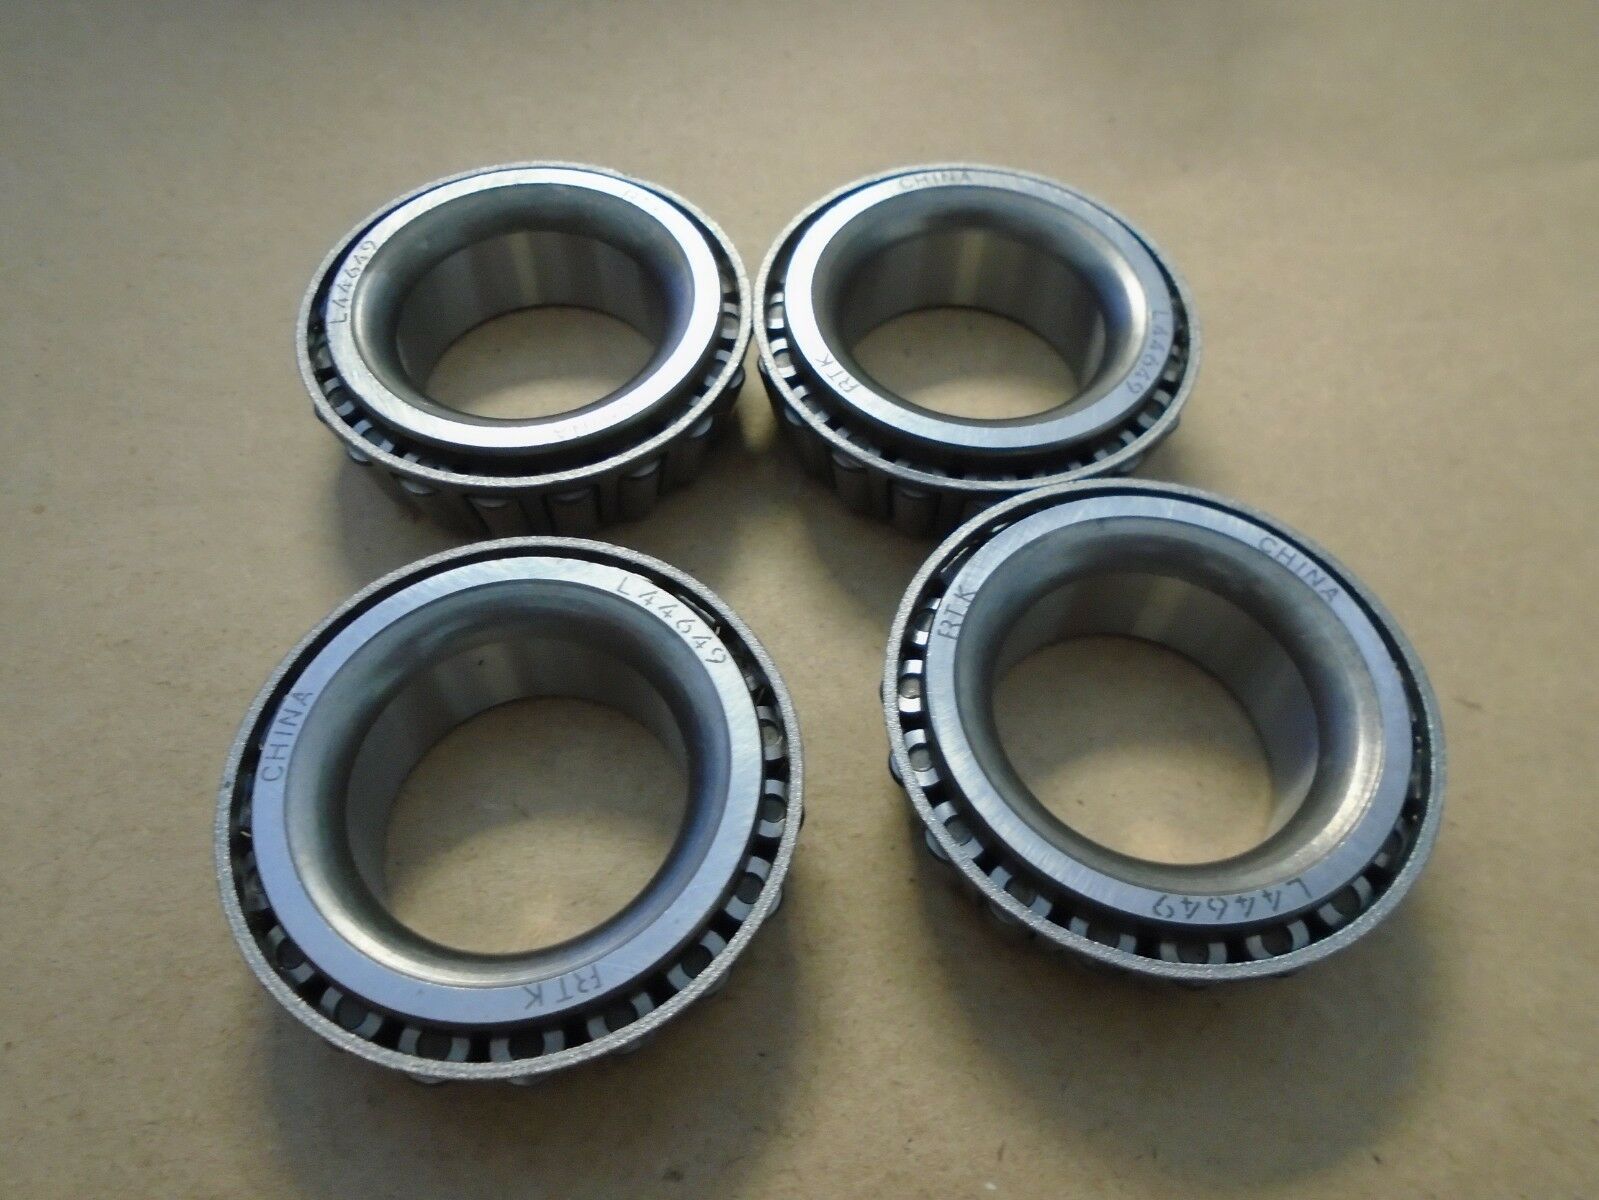 Tapered Roller Bearing LM300849/LM300811 57414/LM300811 LM501349/LM501310 LM501349/LM501314 JLM506849/JLM506810 HM518445/HM518410 LM603049/LM603011 LM603049A/LM603014 LM603049A/LM603012 JM716649/JM716